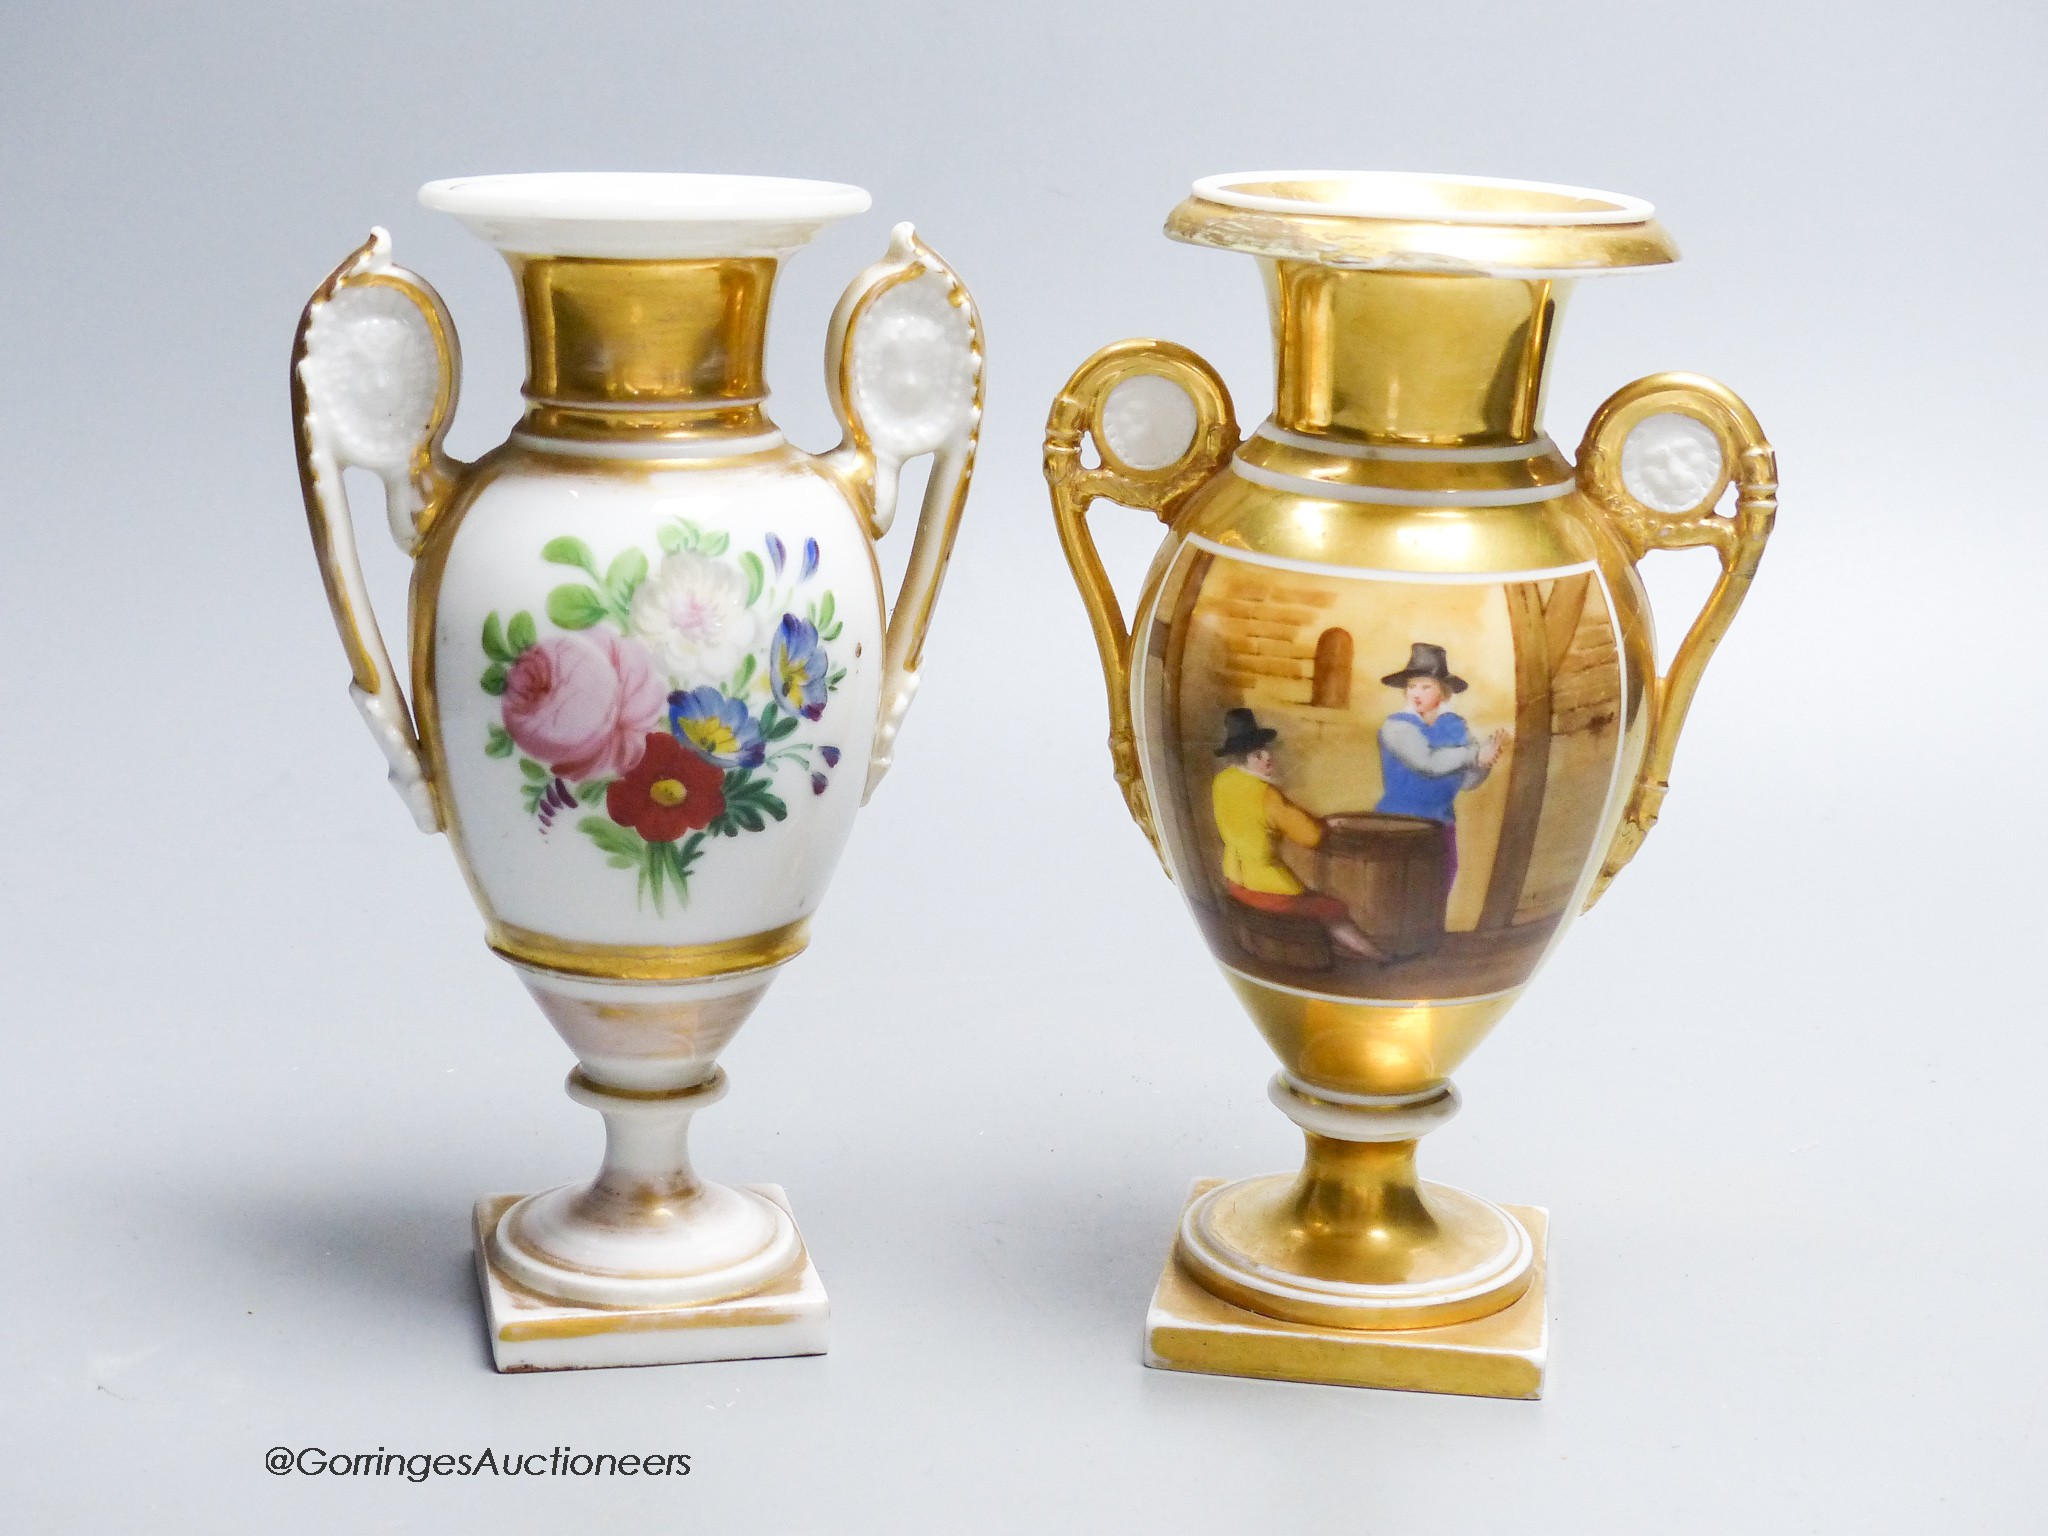 A pair of French porcelain two-handled vases, height 16.5cm